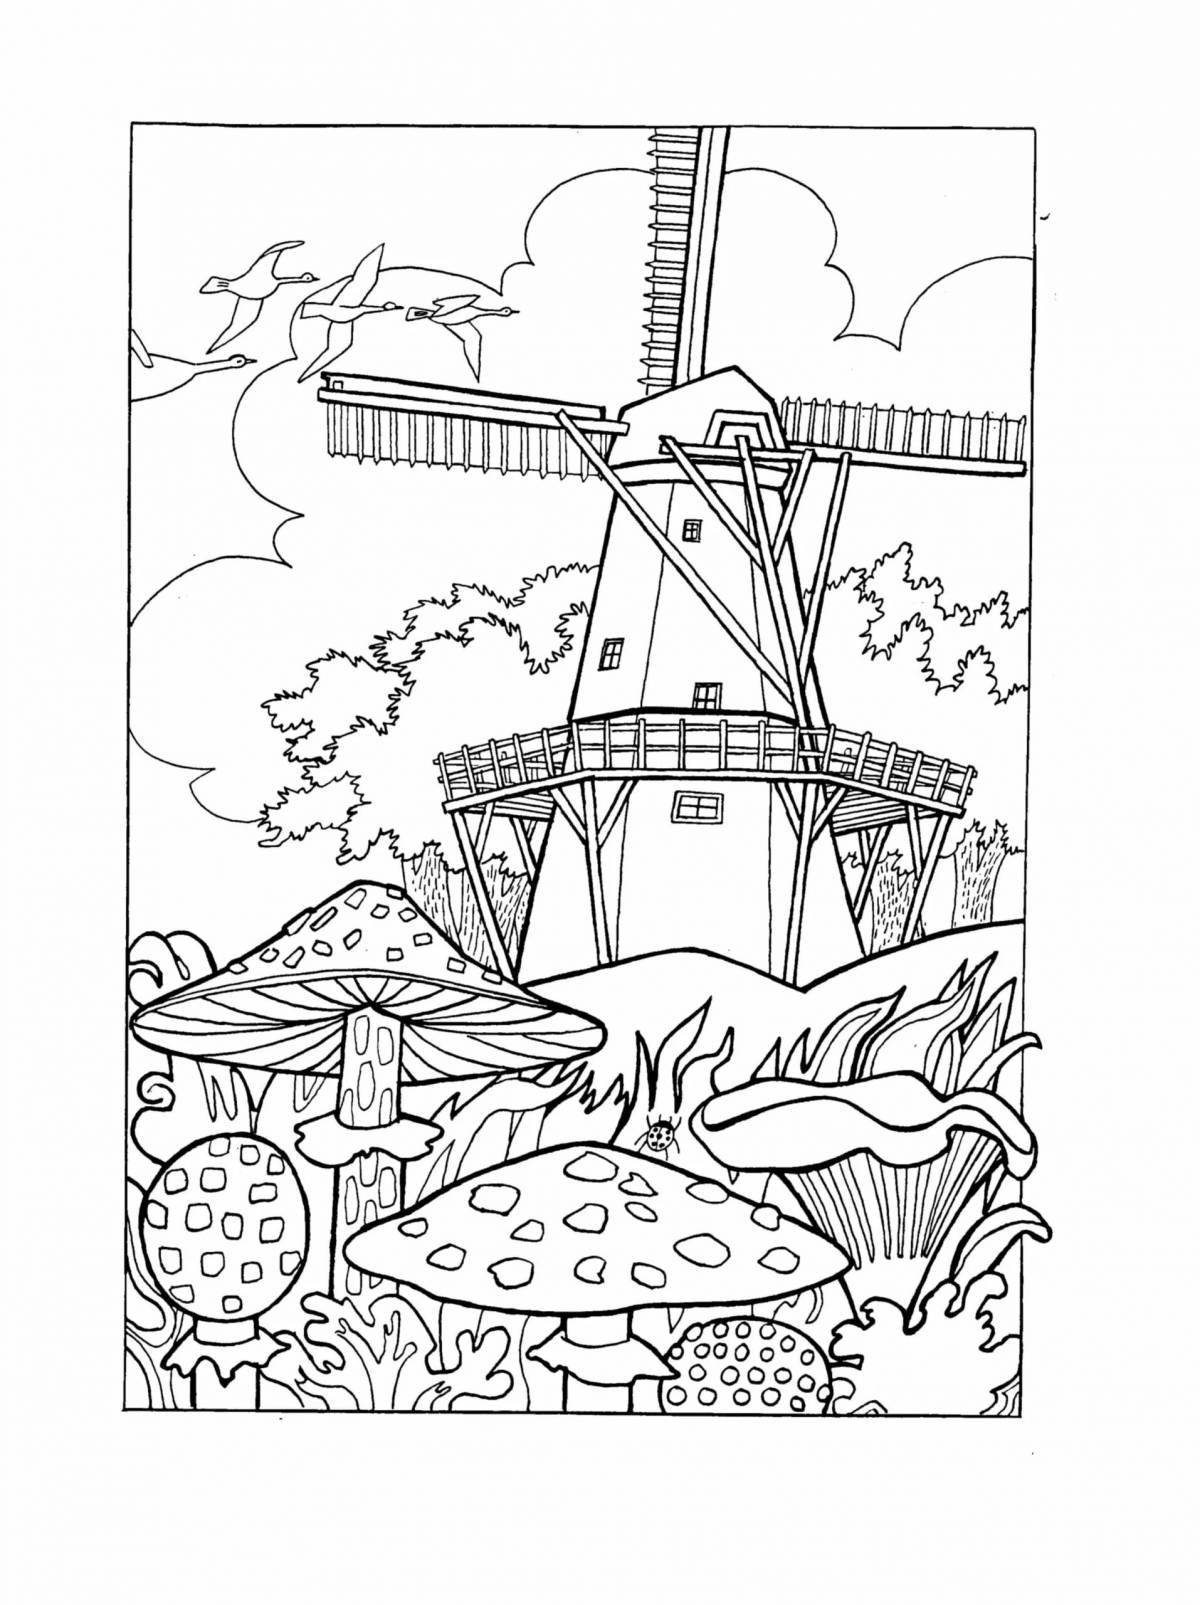 Exquisite holland coloring book